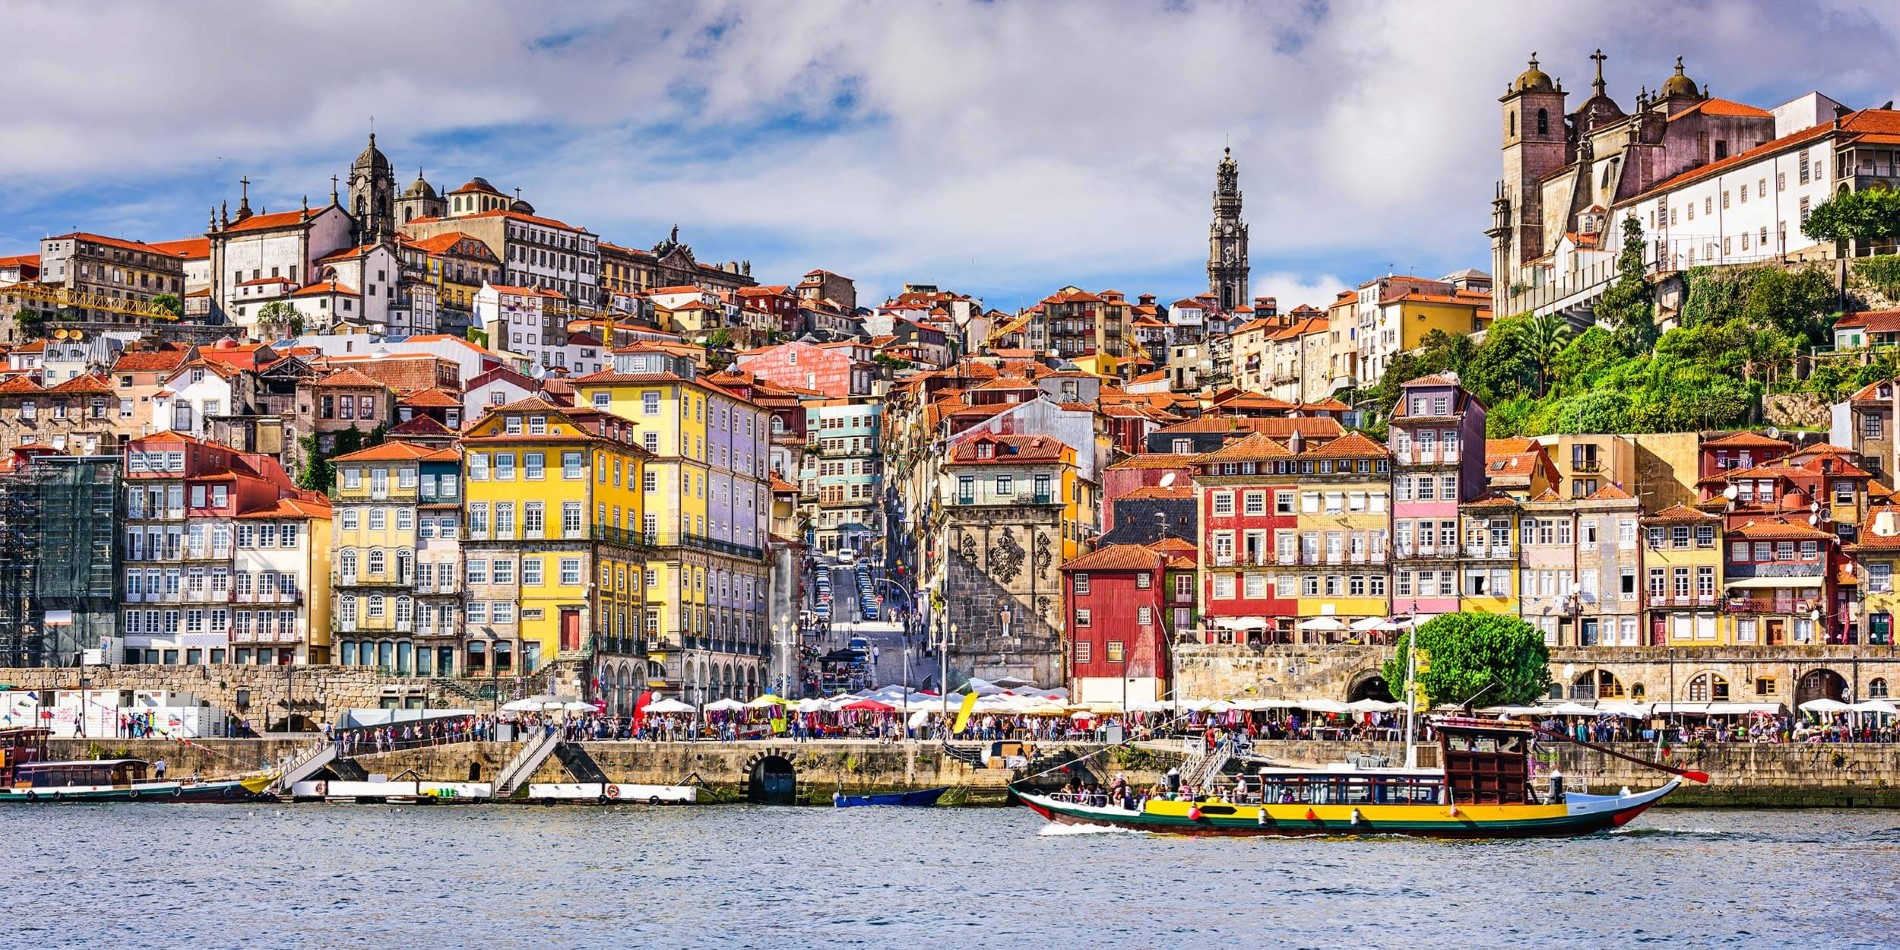 A small boat in a body of water with Porto in the background